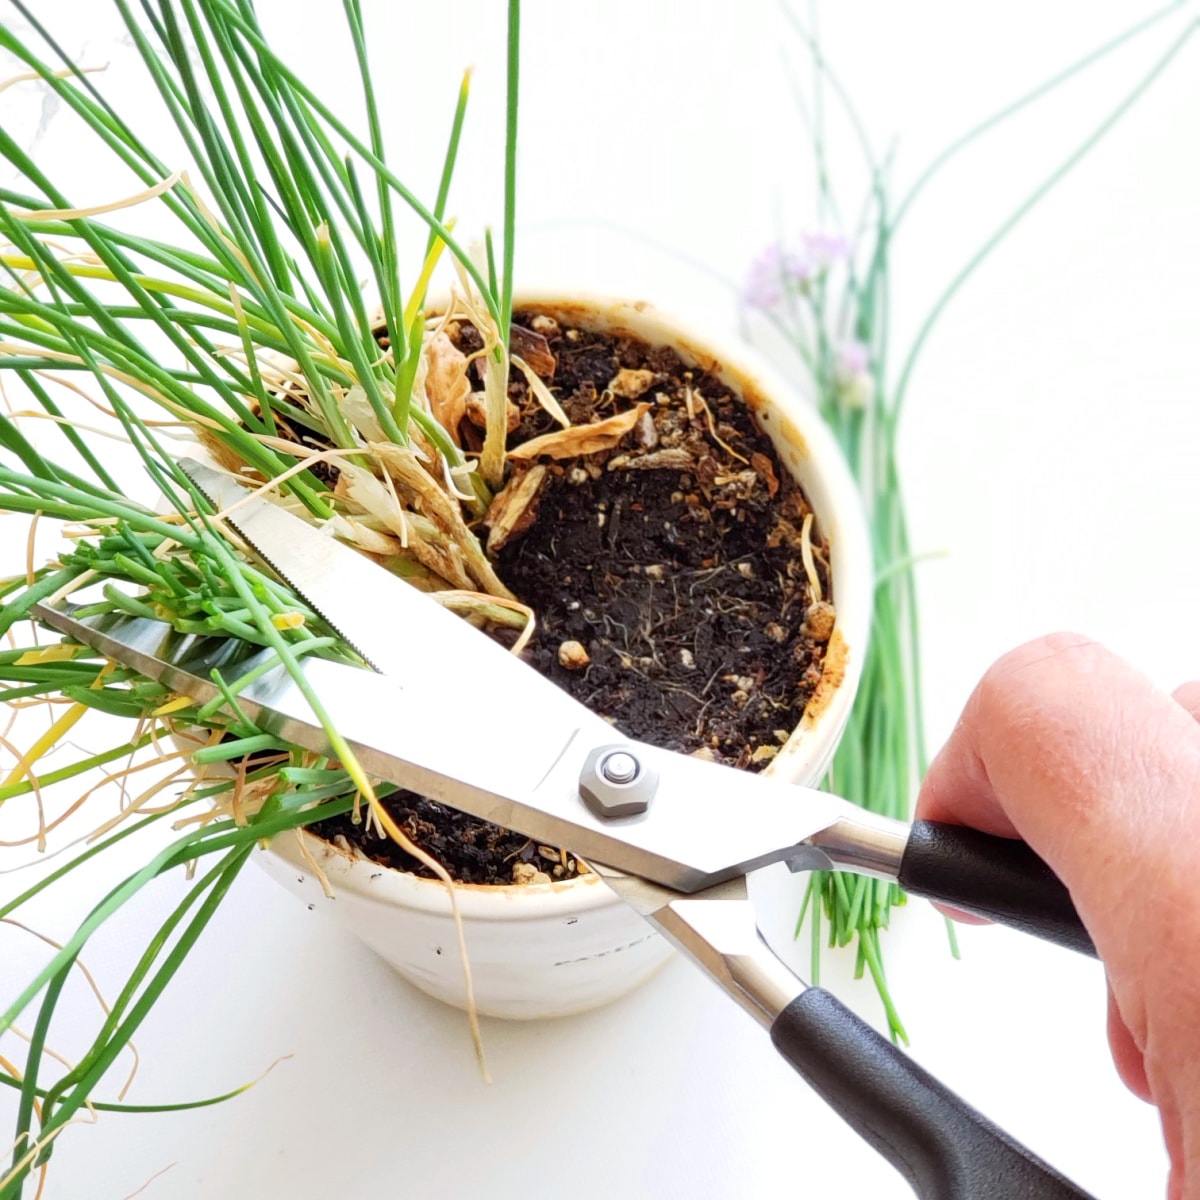 Snip chives with a kitchen shears. Chives are in a white pot.